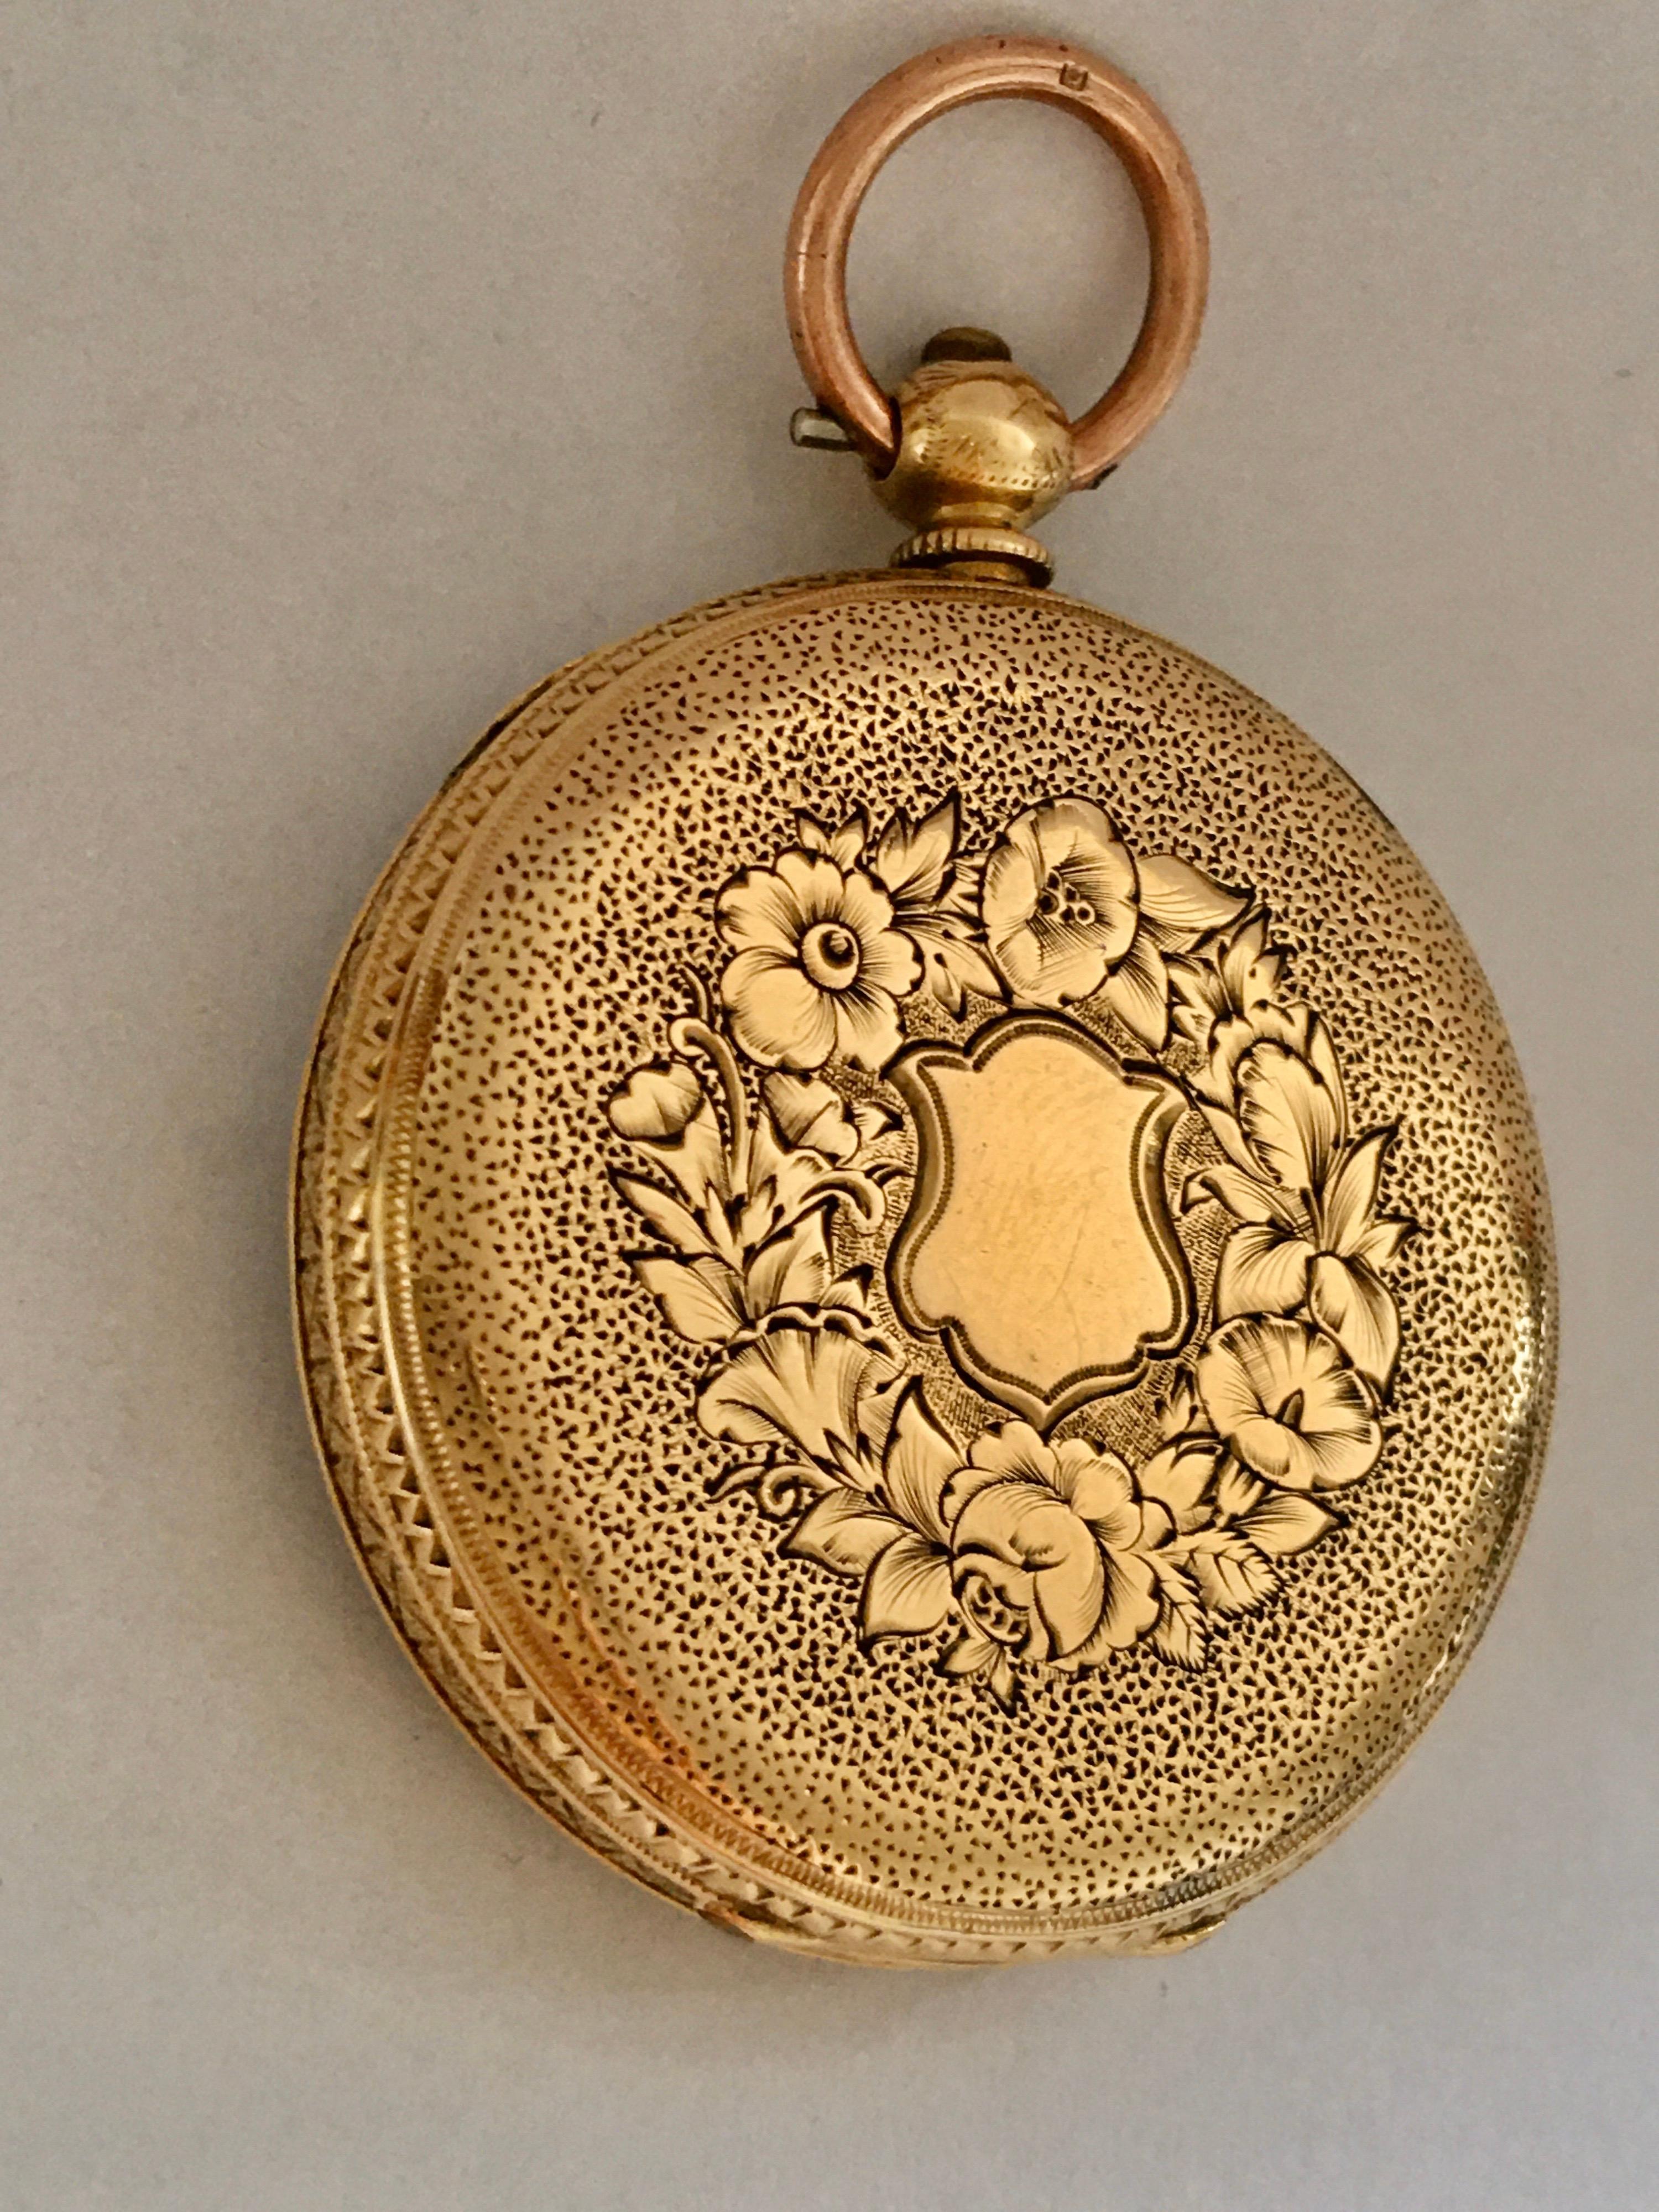 18K Gold Victorian Period Ladies Fob / Pocket Watch Signed by John Neal, London For Sale 4